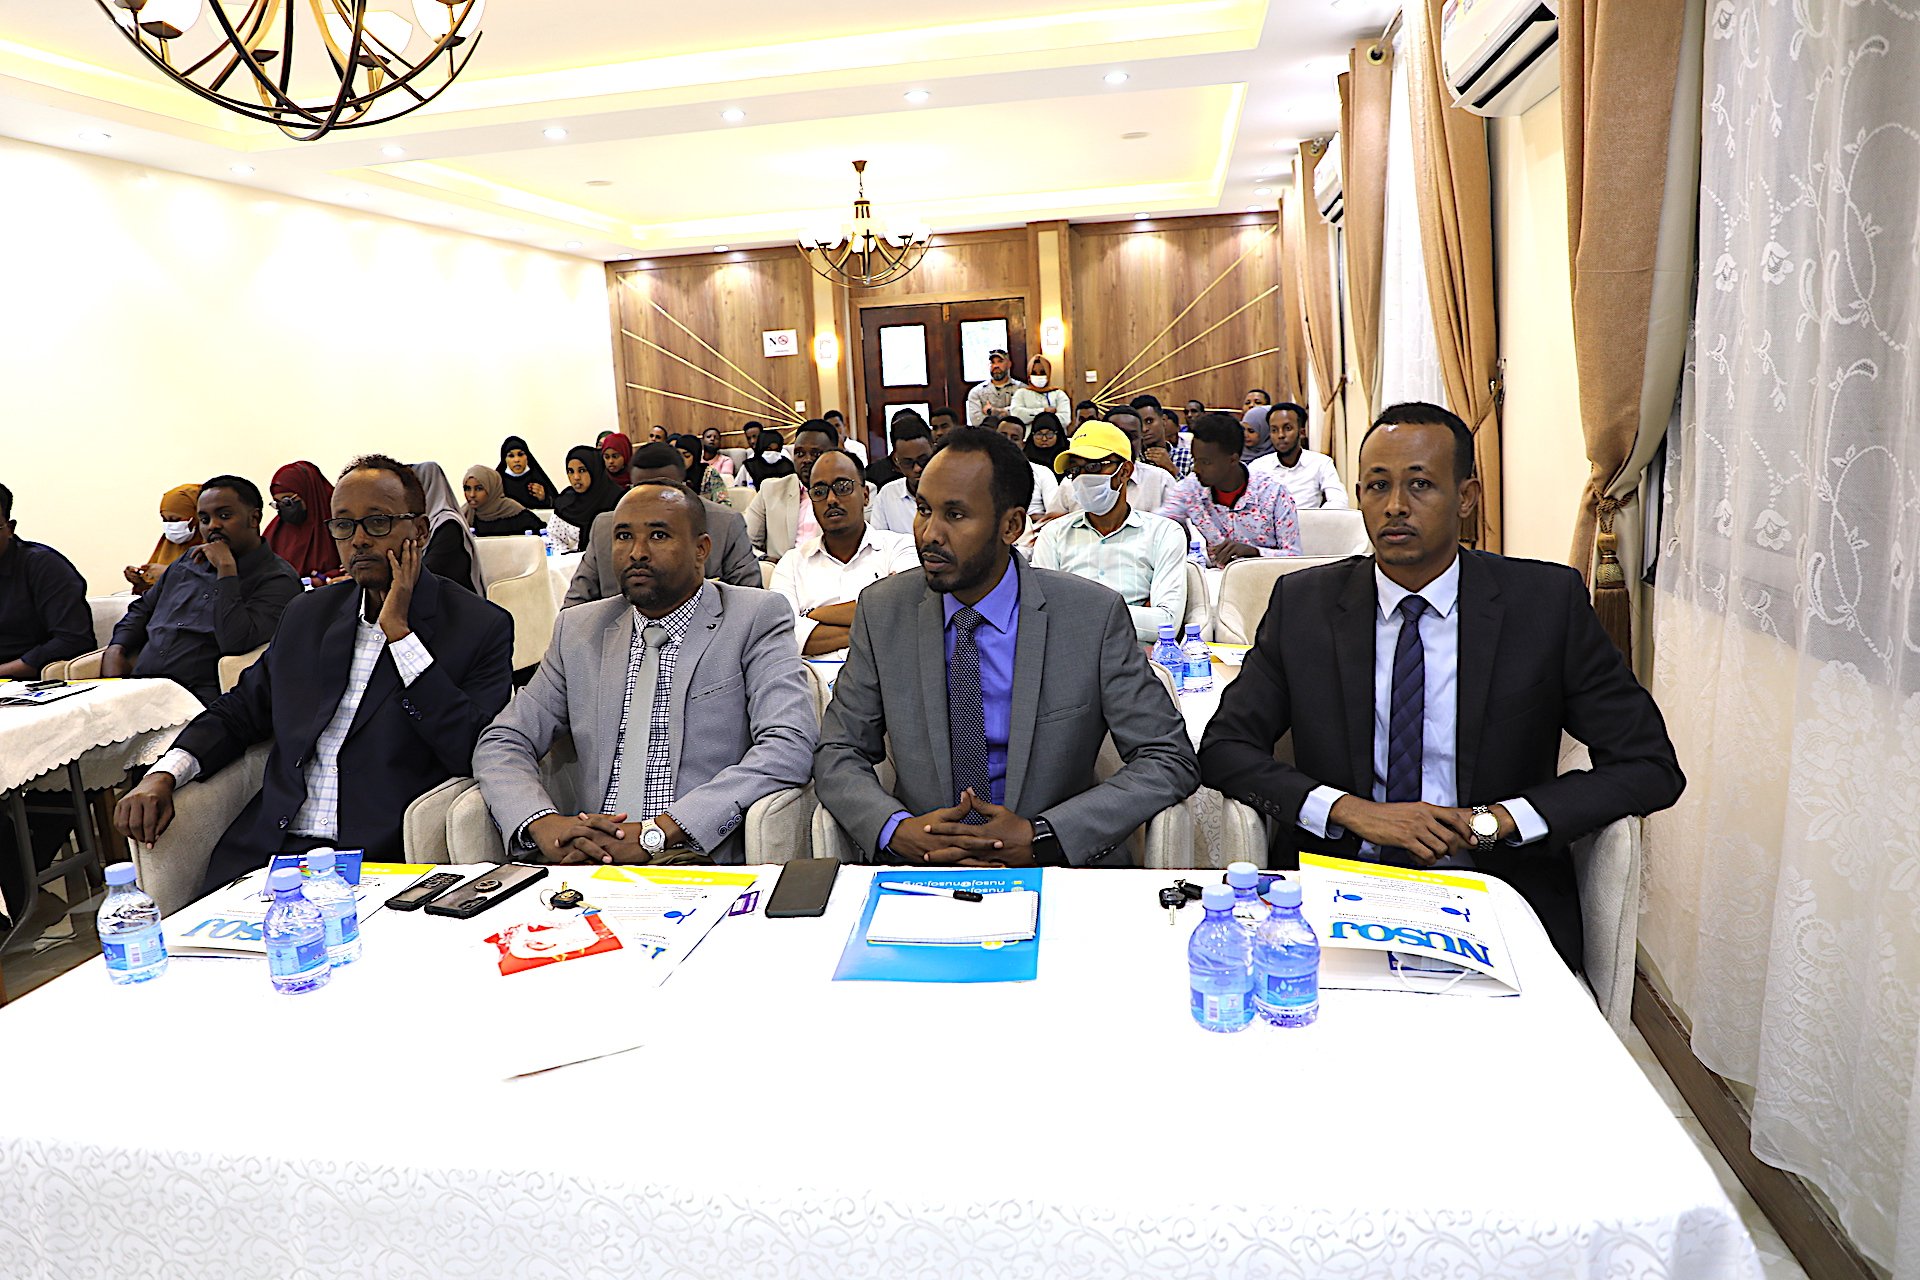 Launch of a National Program to Promote the Role and Place of Somali Journalists in Preventing Violent Extremism through Positive Narratives and Effective Reporting